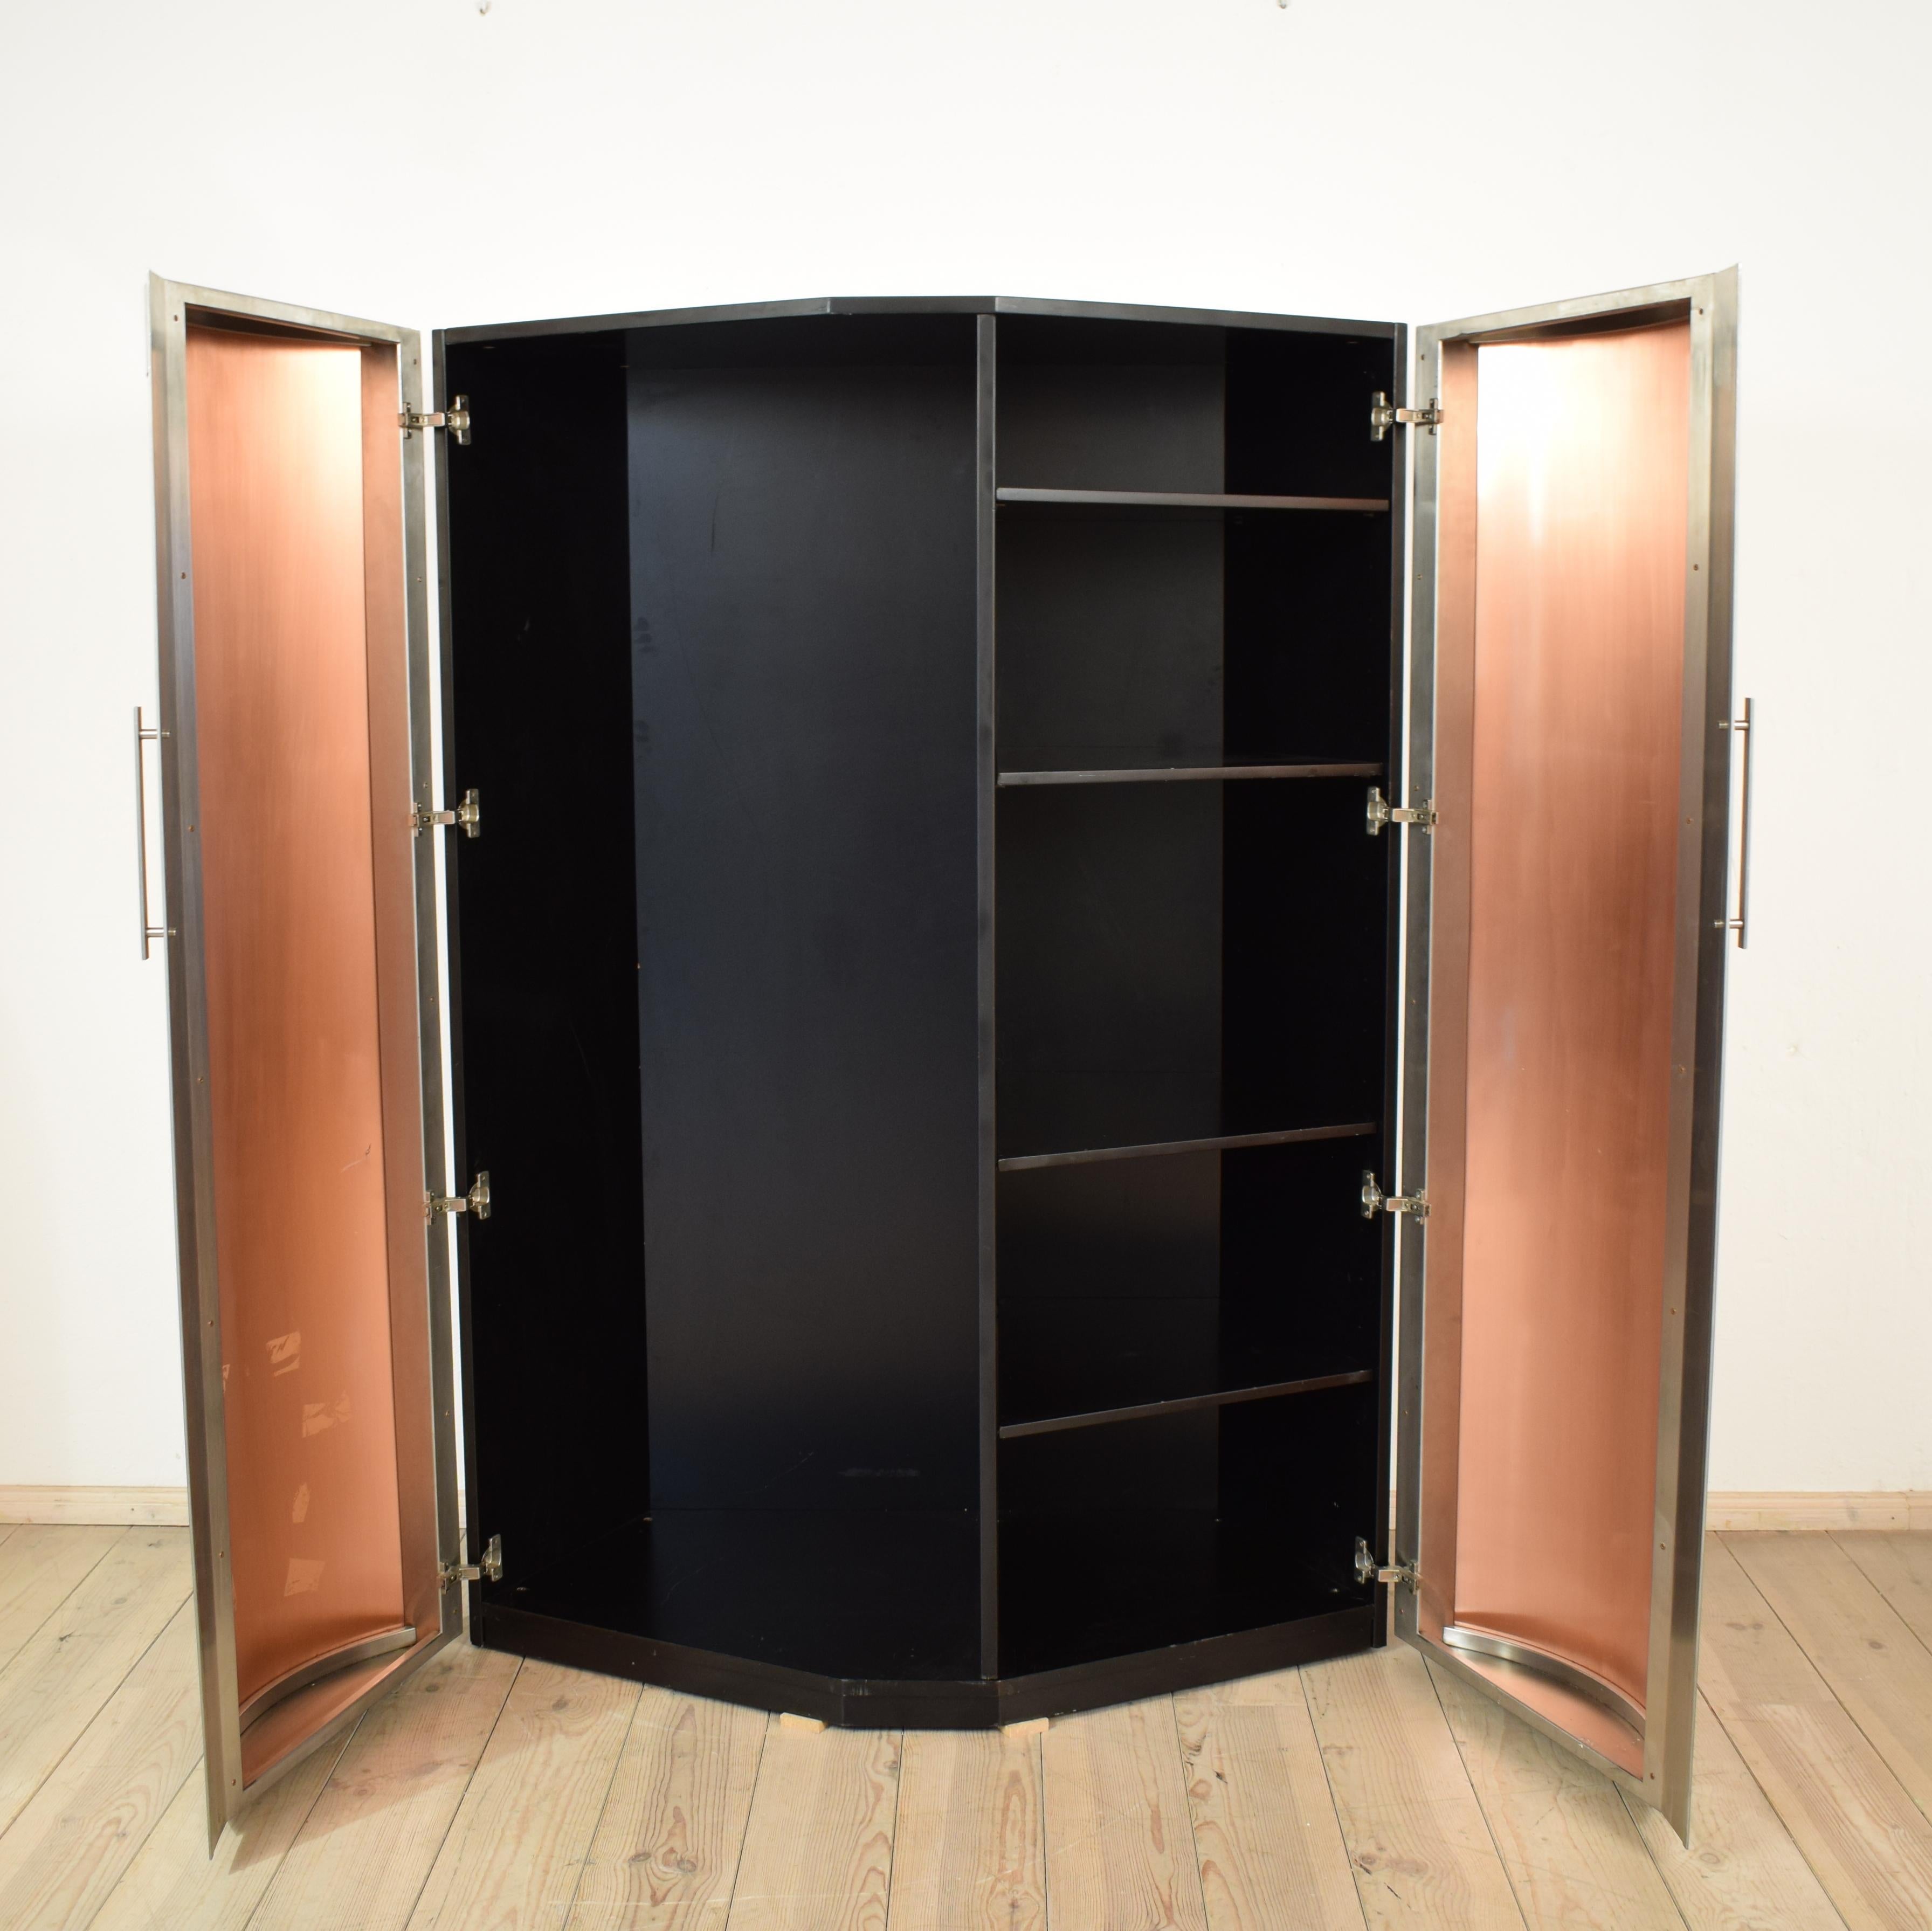 Space Age 1980s Corner Cabinet / Cabinet with Copper Doors